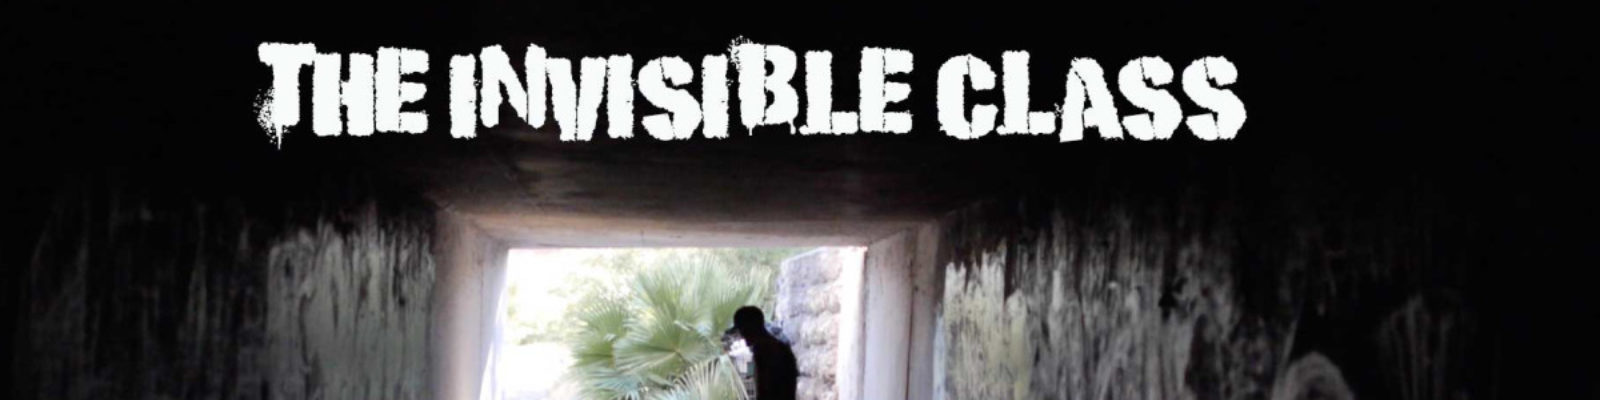 The Invisible Class